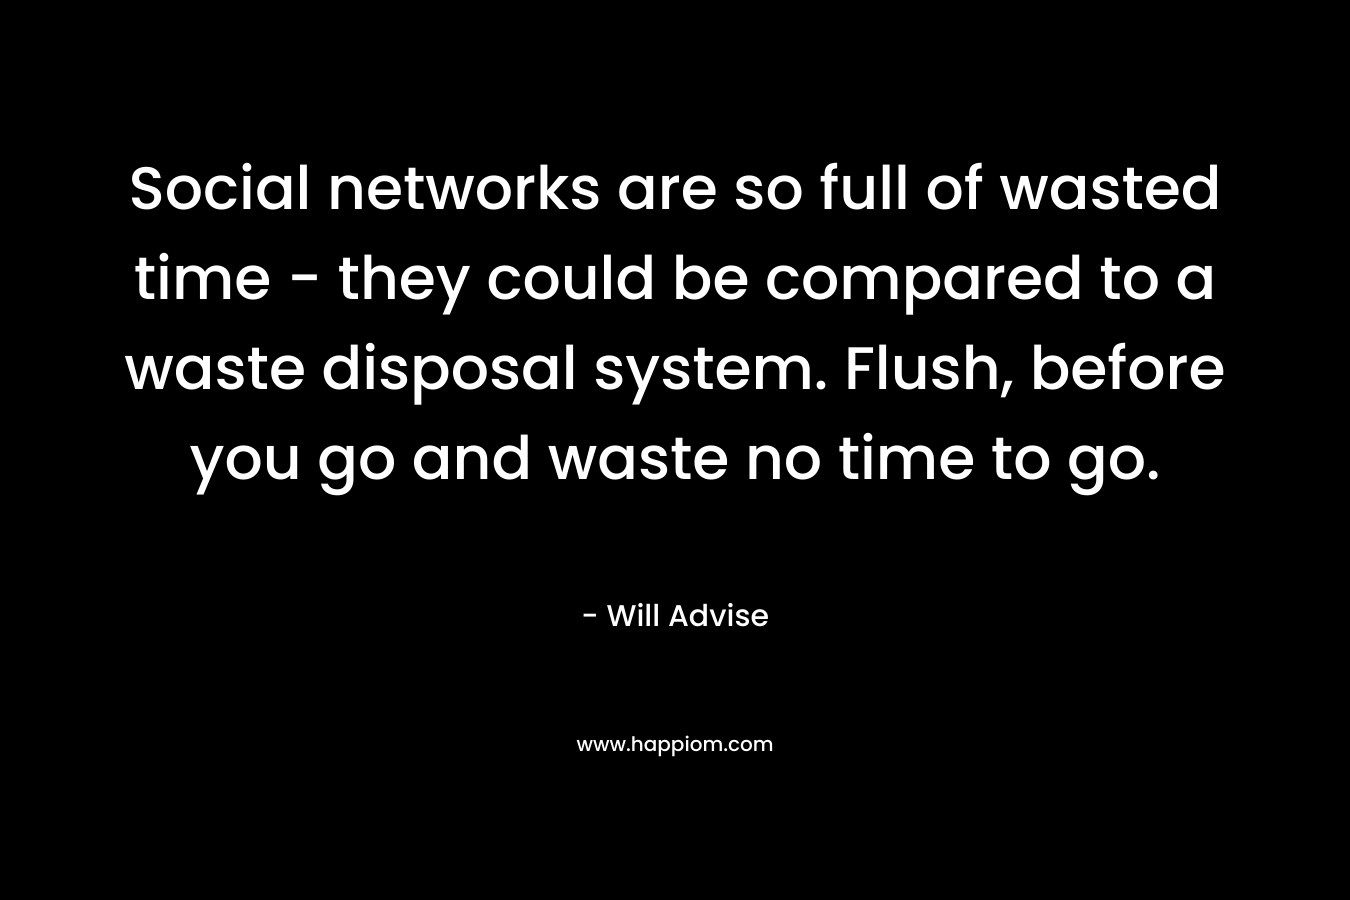 Social networks are so full of wasted time – they could be compared to a waste disposal system. Flush, before you go and waste no time to go. – Will Advise